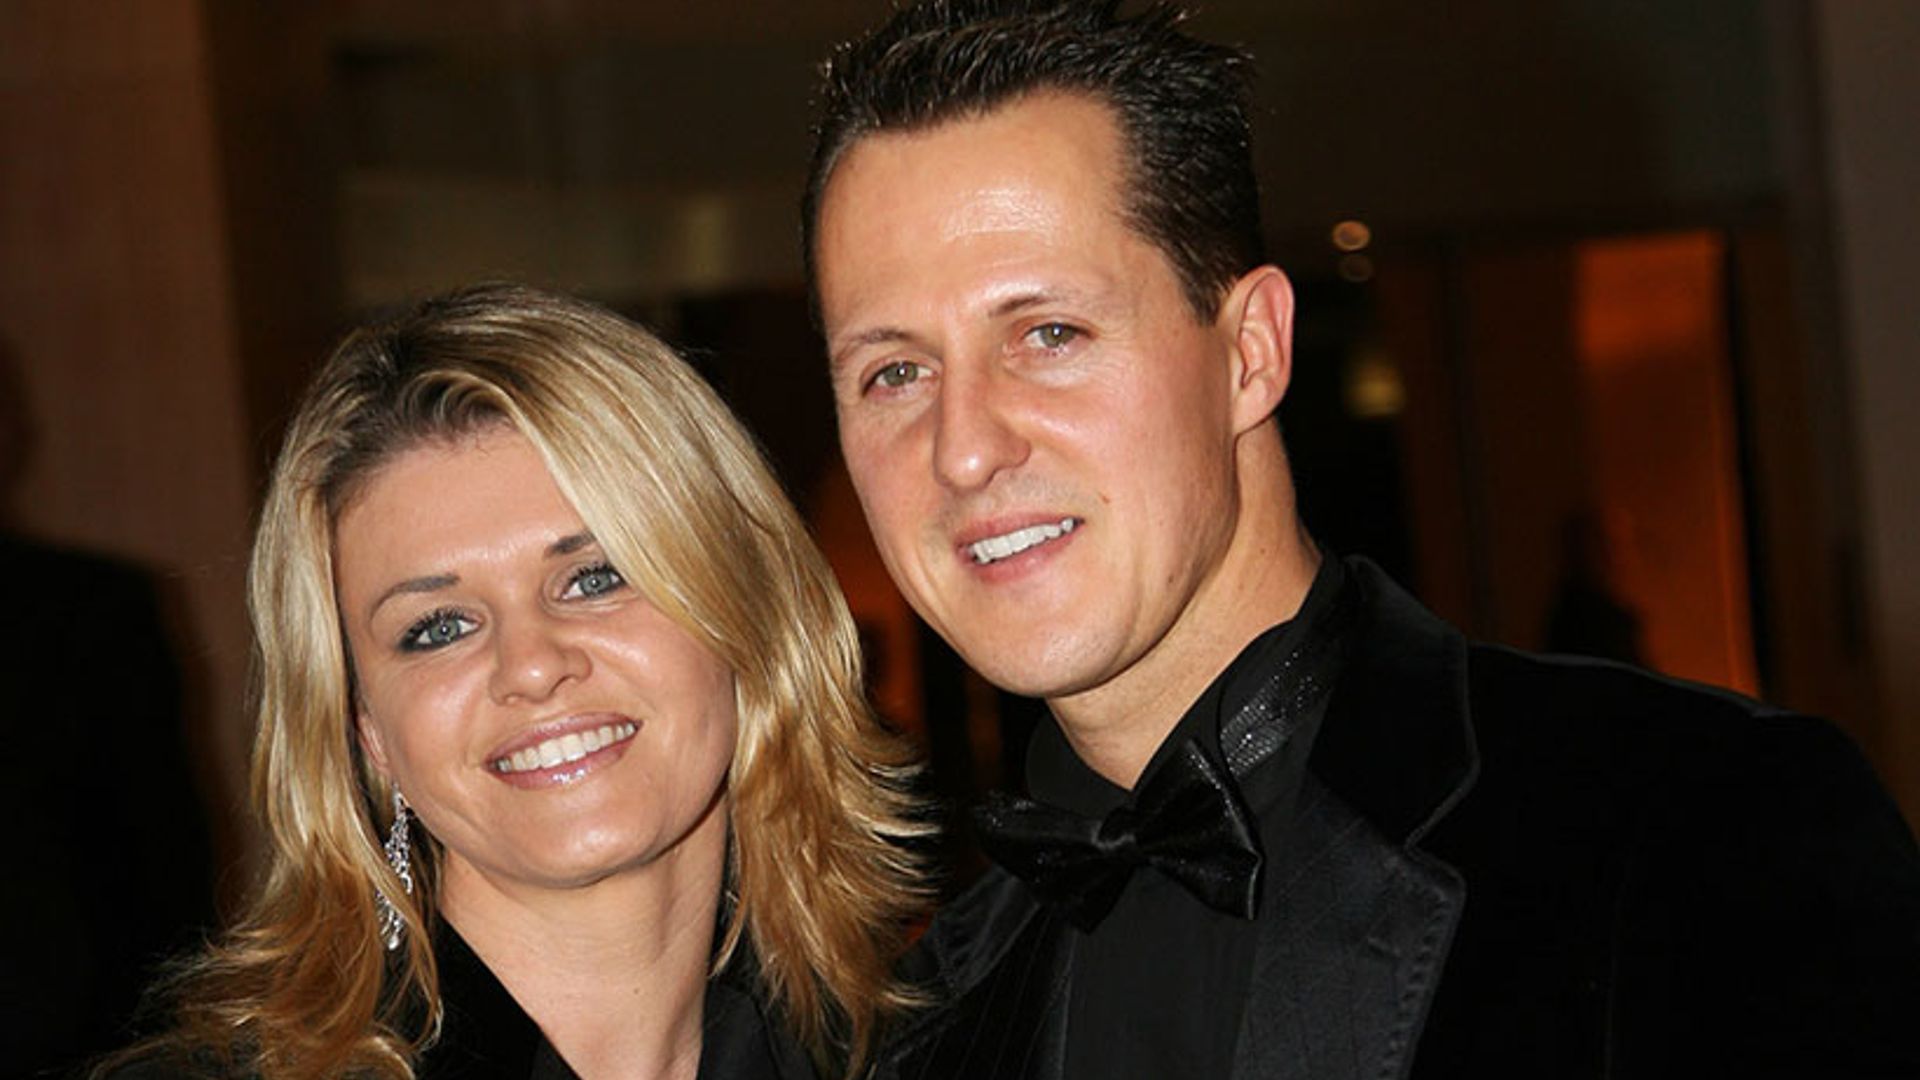 Michael Schumacher's wife releases rare statement ahead of star's 50th birthday